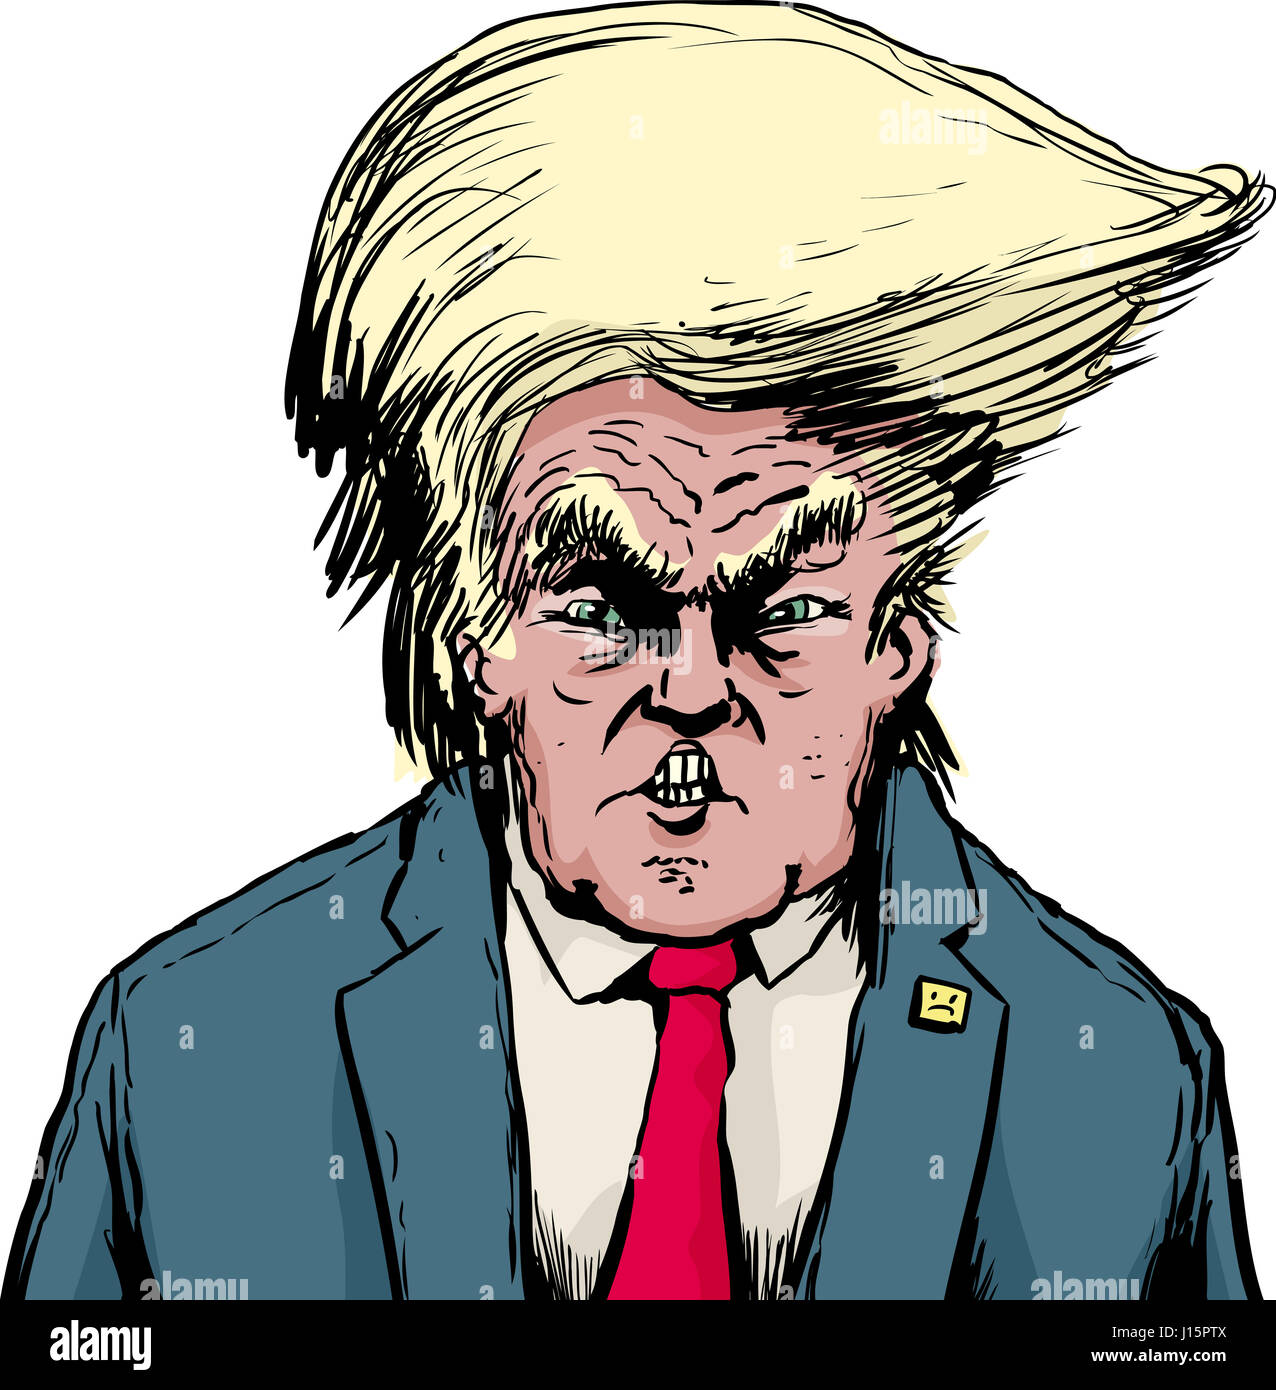 April 18, 2017. Caricature of angry Donald Trump with Bouffant hairdo over white background Stock Photo